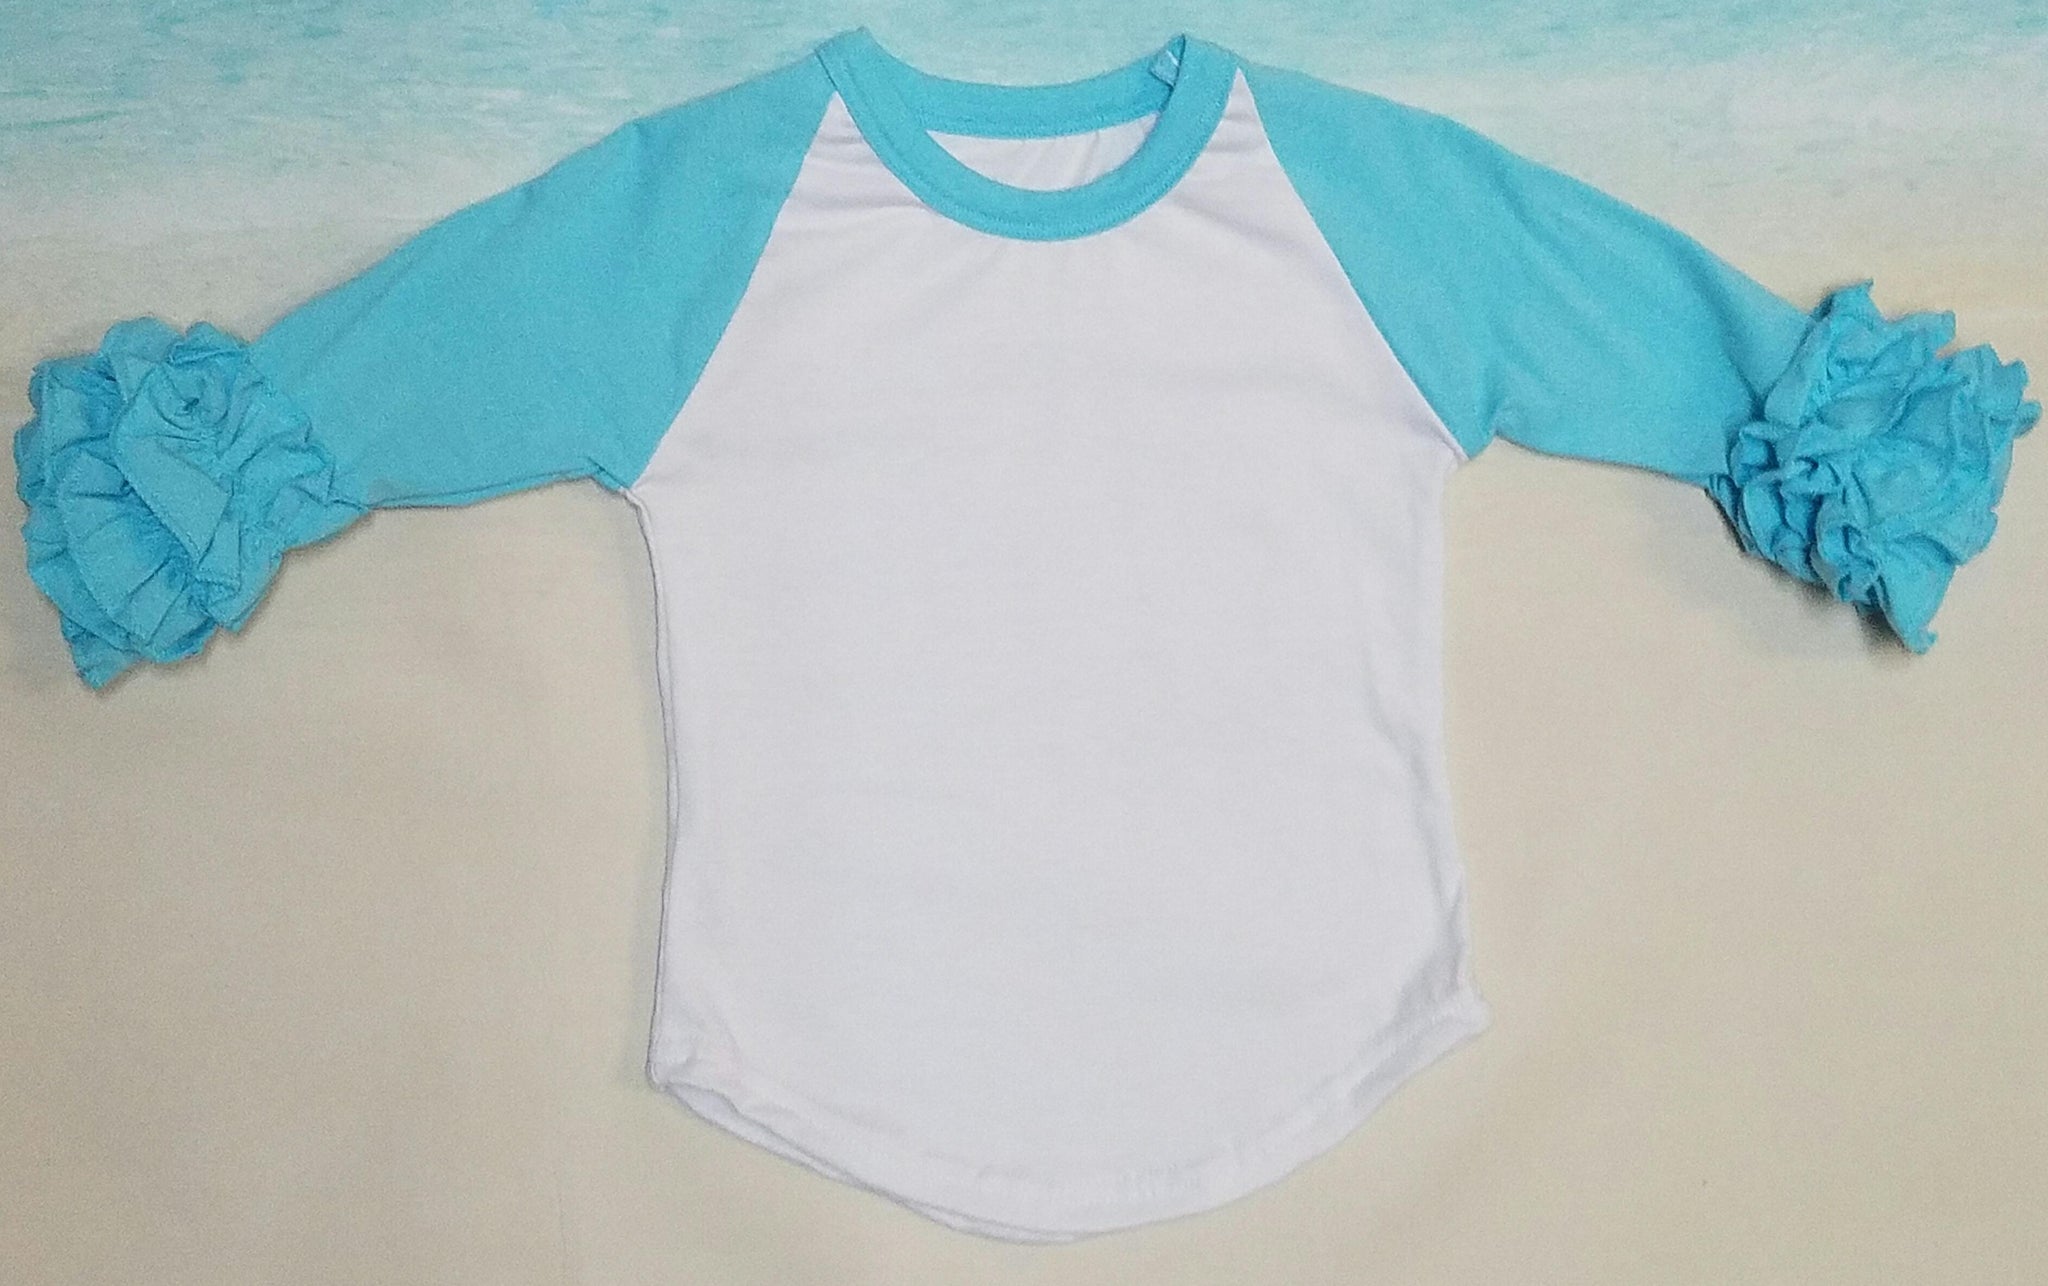 Aqua and White Ruffle Raglan, Perfect for Monograms - Momma G's Children's Boutique, Screen Printing, Embroidery & More